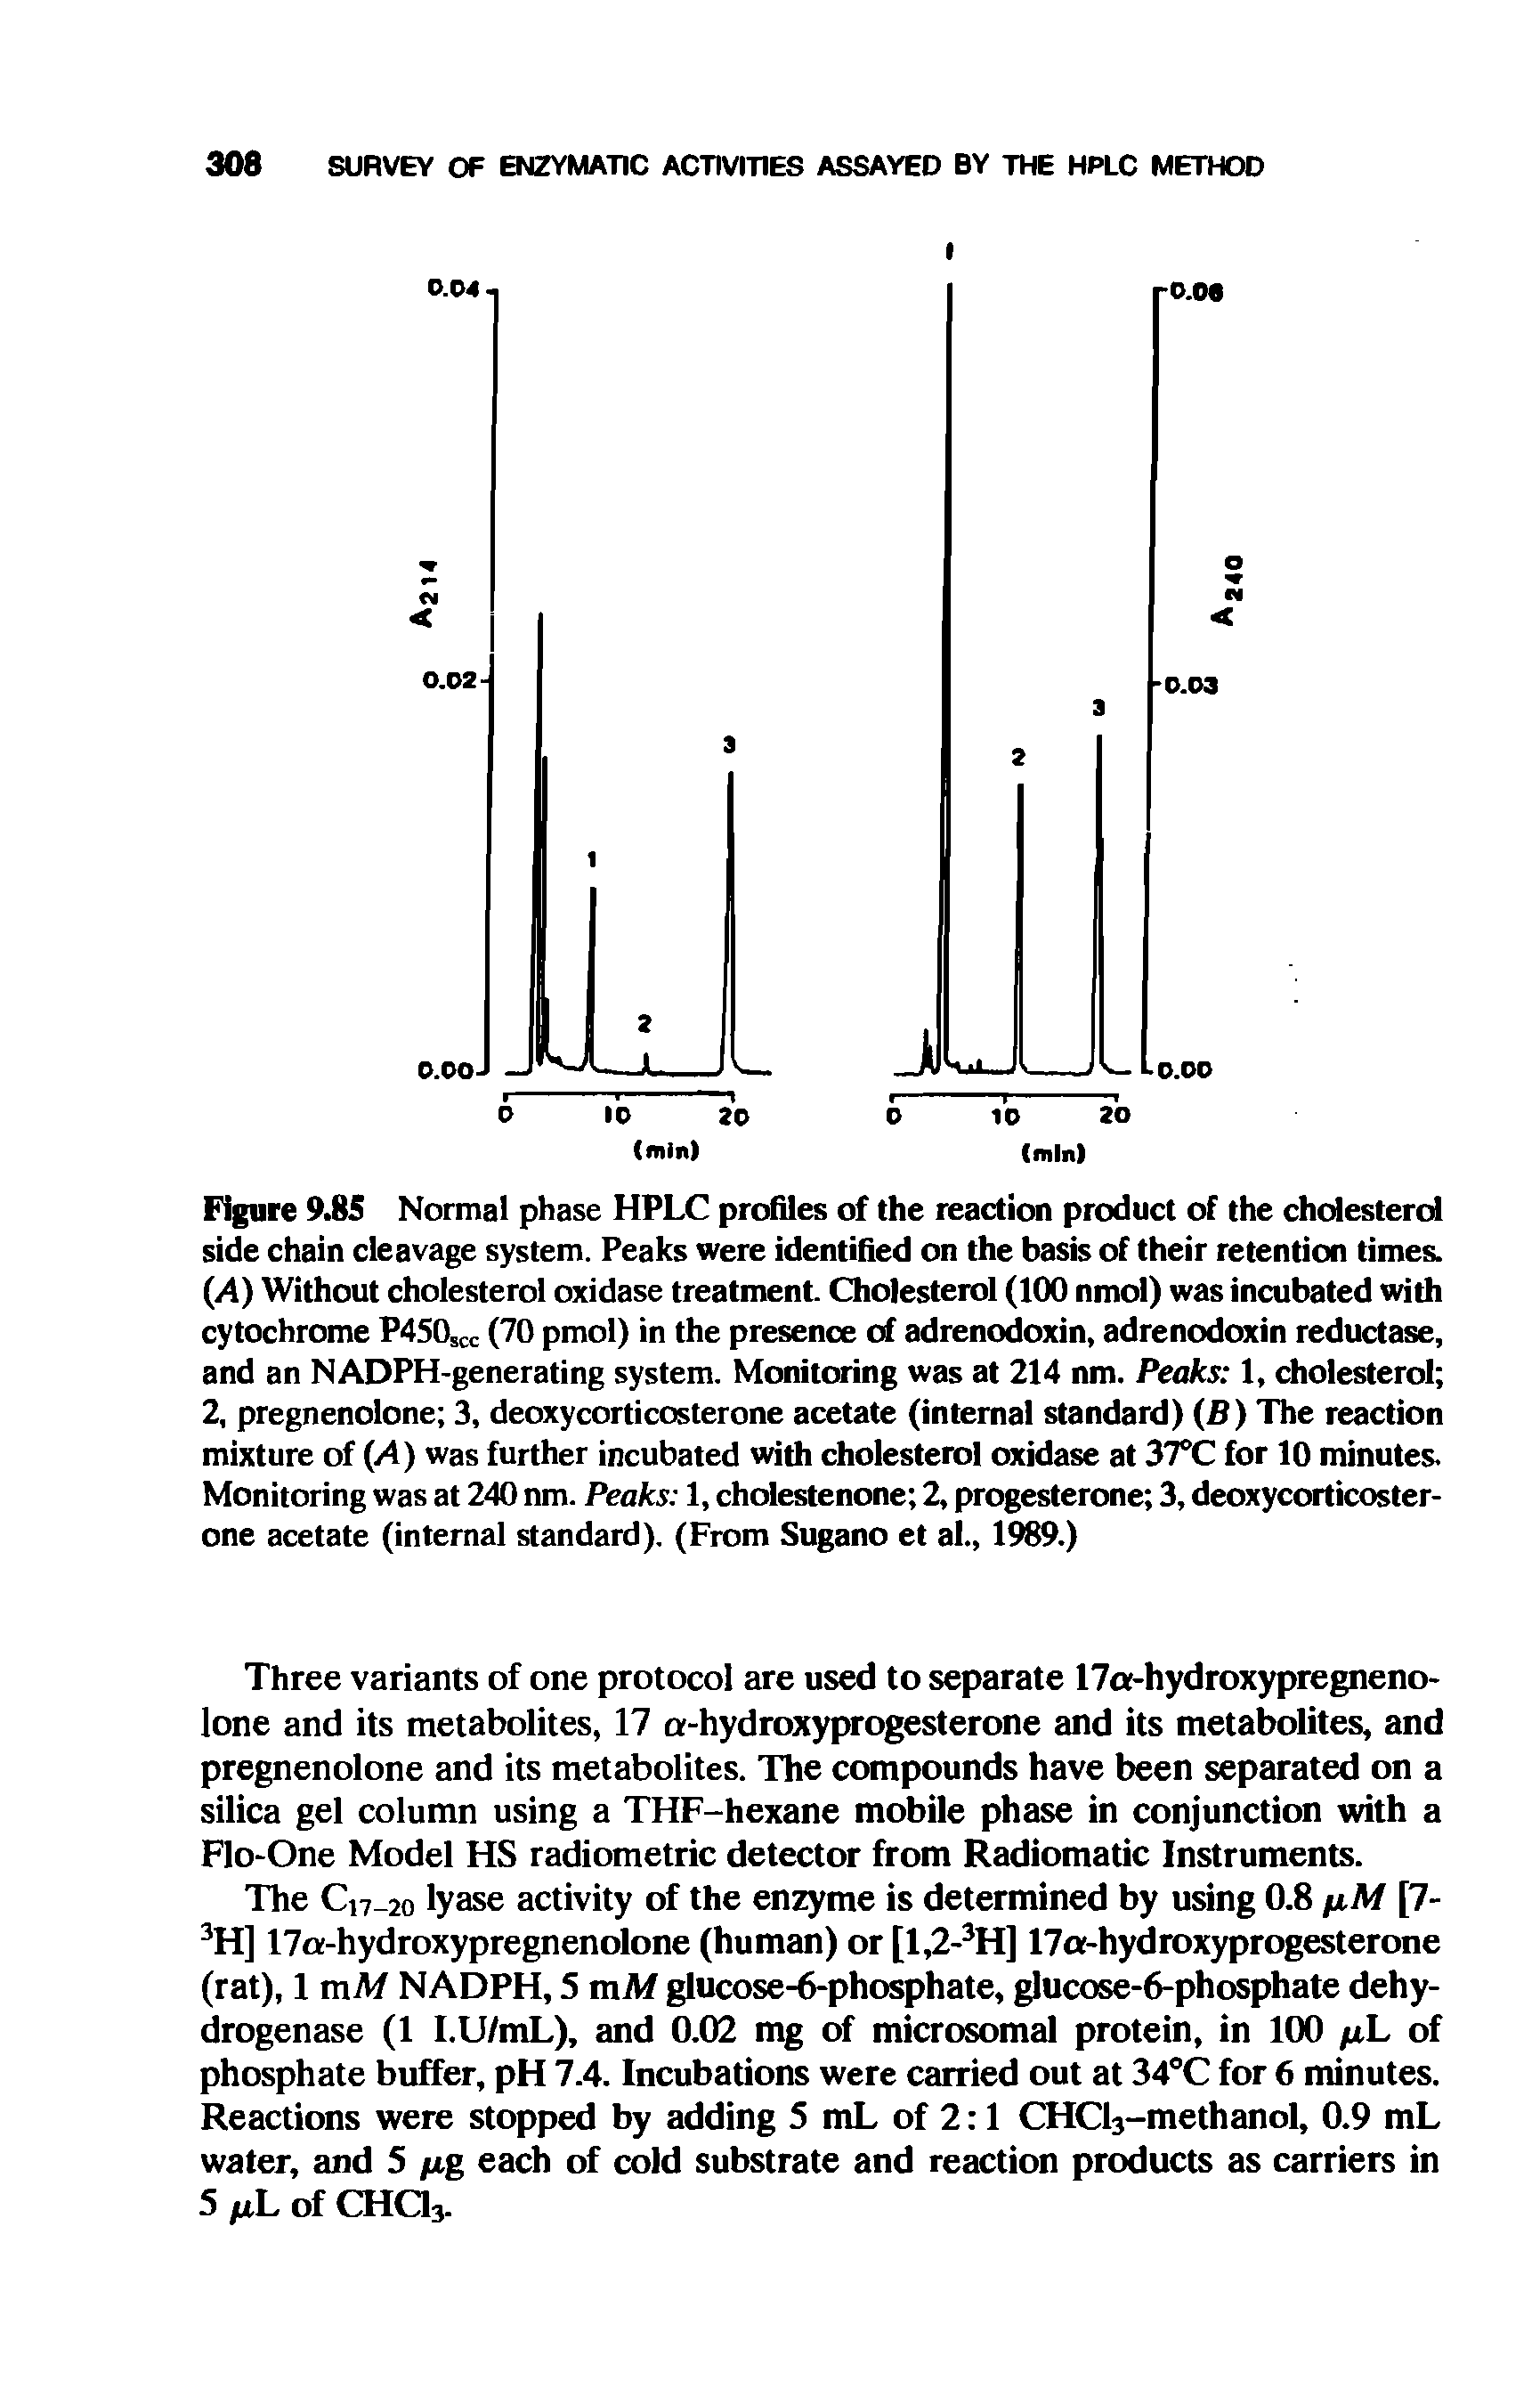 Figure 9.85 Normal phase HPLC profiles of the reaction product of the cholesterol side chain cleavage system. Peaks were identified on the basis of their retention times. (i4) Without cholesterol oxidase treatment. Cholesterol (100 nmol) was incubated with cytochrome P450scc (70 pmol) in the presence of adrenodoxin, adrenodoxin reductase, and an NADPH-generating system. Monitoring was at 214 nm. Peaks 1, cholesterol 2, pregnenolone 3, deoxycorticosterone acetate (internal standard) (B) The reaction mixture of (A) was further incubated with cholesterol oxidase at 37°C for 10 minutes. Monitoring was at 240 nm. Peaks 1, cholestenone 2, progesterone 3, deoxycorticosterone acetate (internal standard). (From Sugano et al., 1989.)...